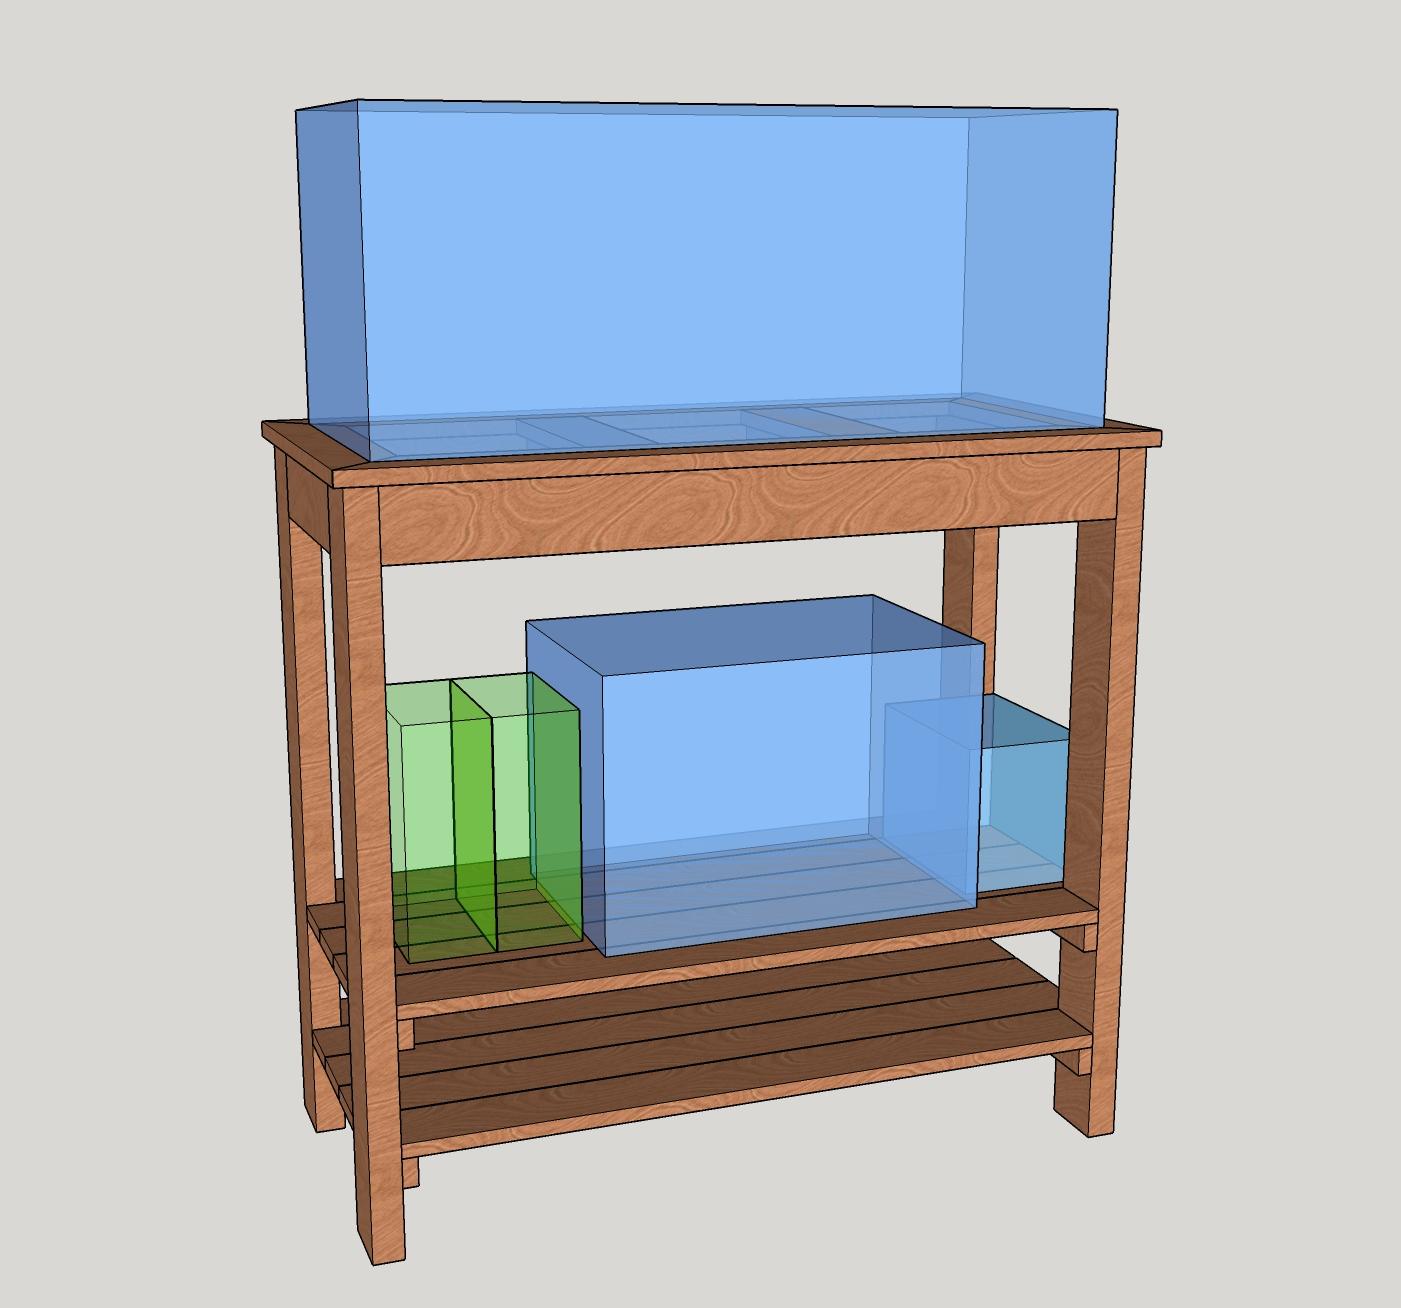 Second draft of aquarium stand with shelves showing the tanks I intend to keep on it, designed in SketchUp